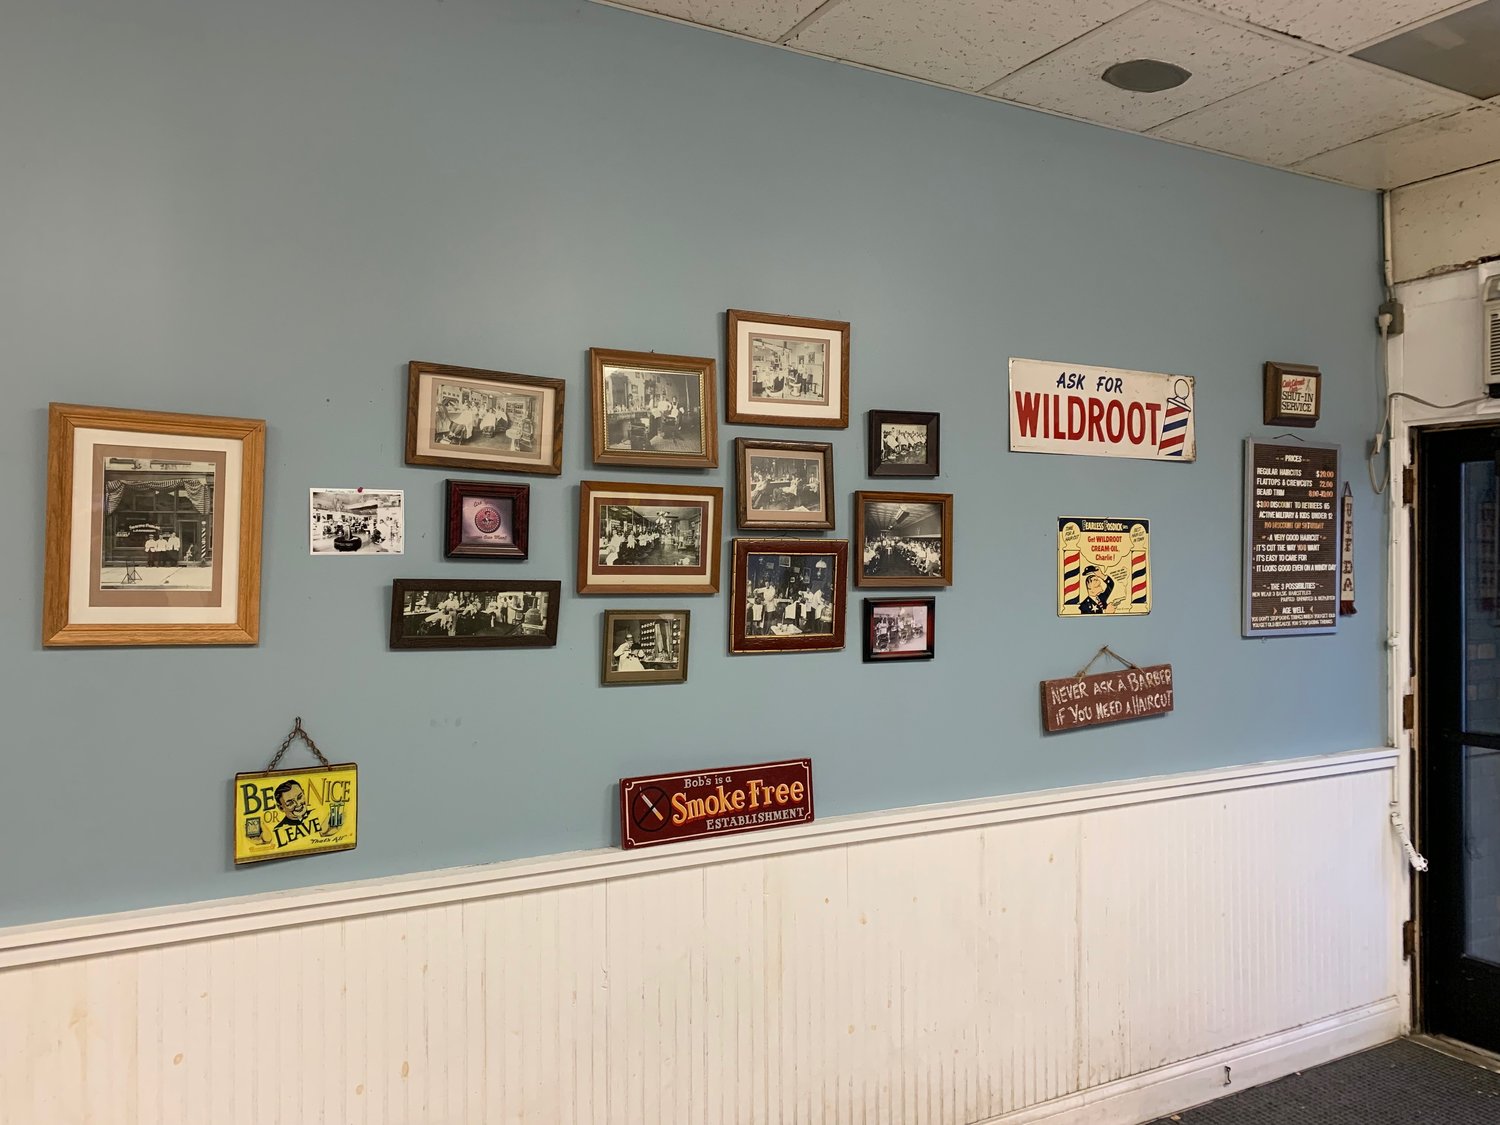 A photo history of barbering is displayed on one wall of 94-year-old Bob’s Barber Shop.